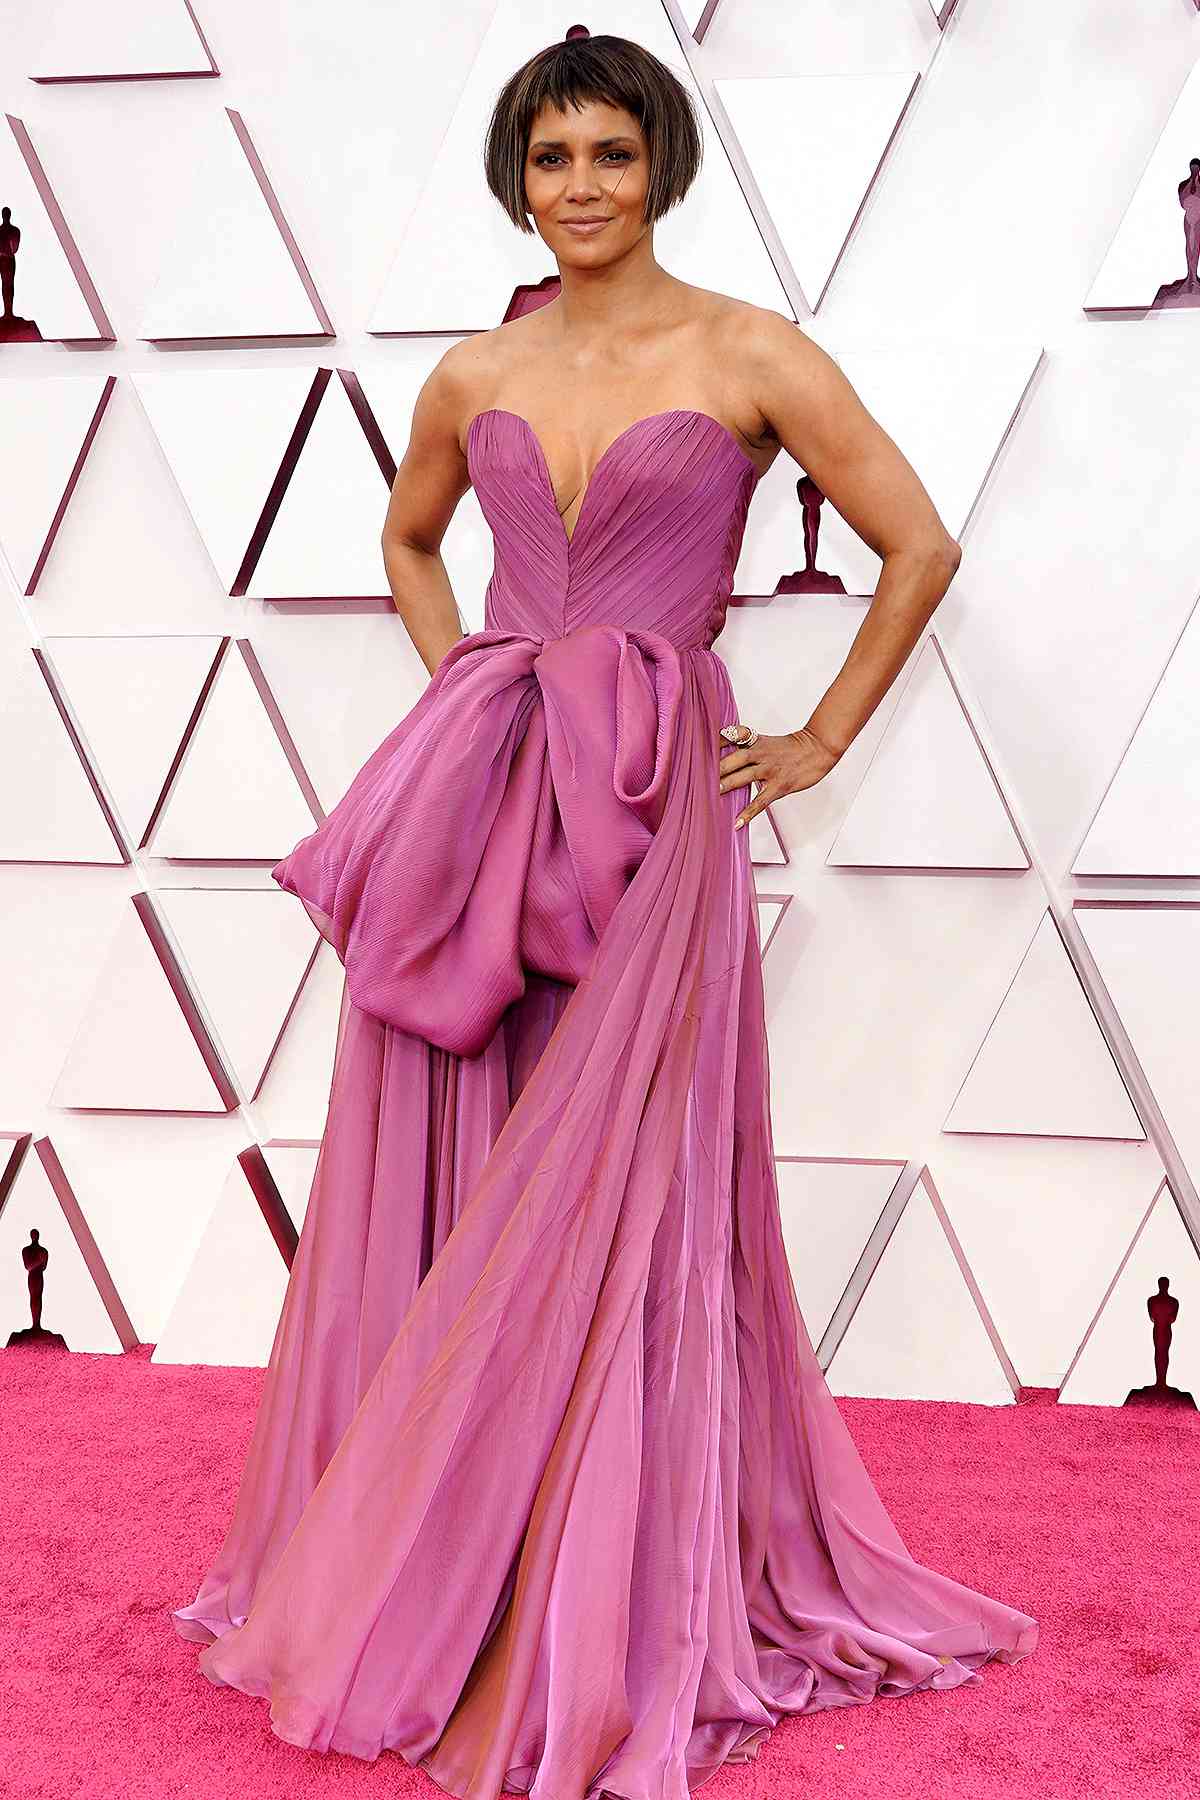 Halle Berry arrives at the Oscars